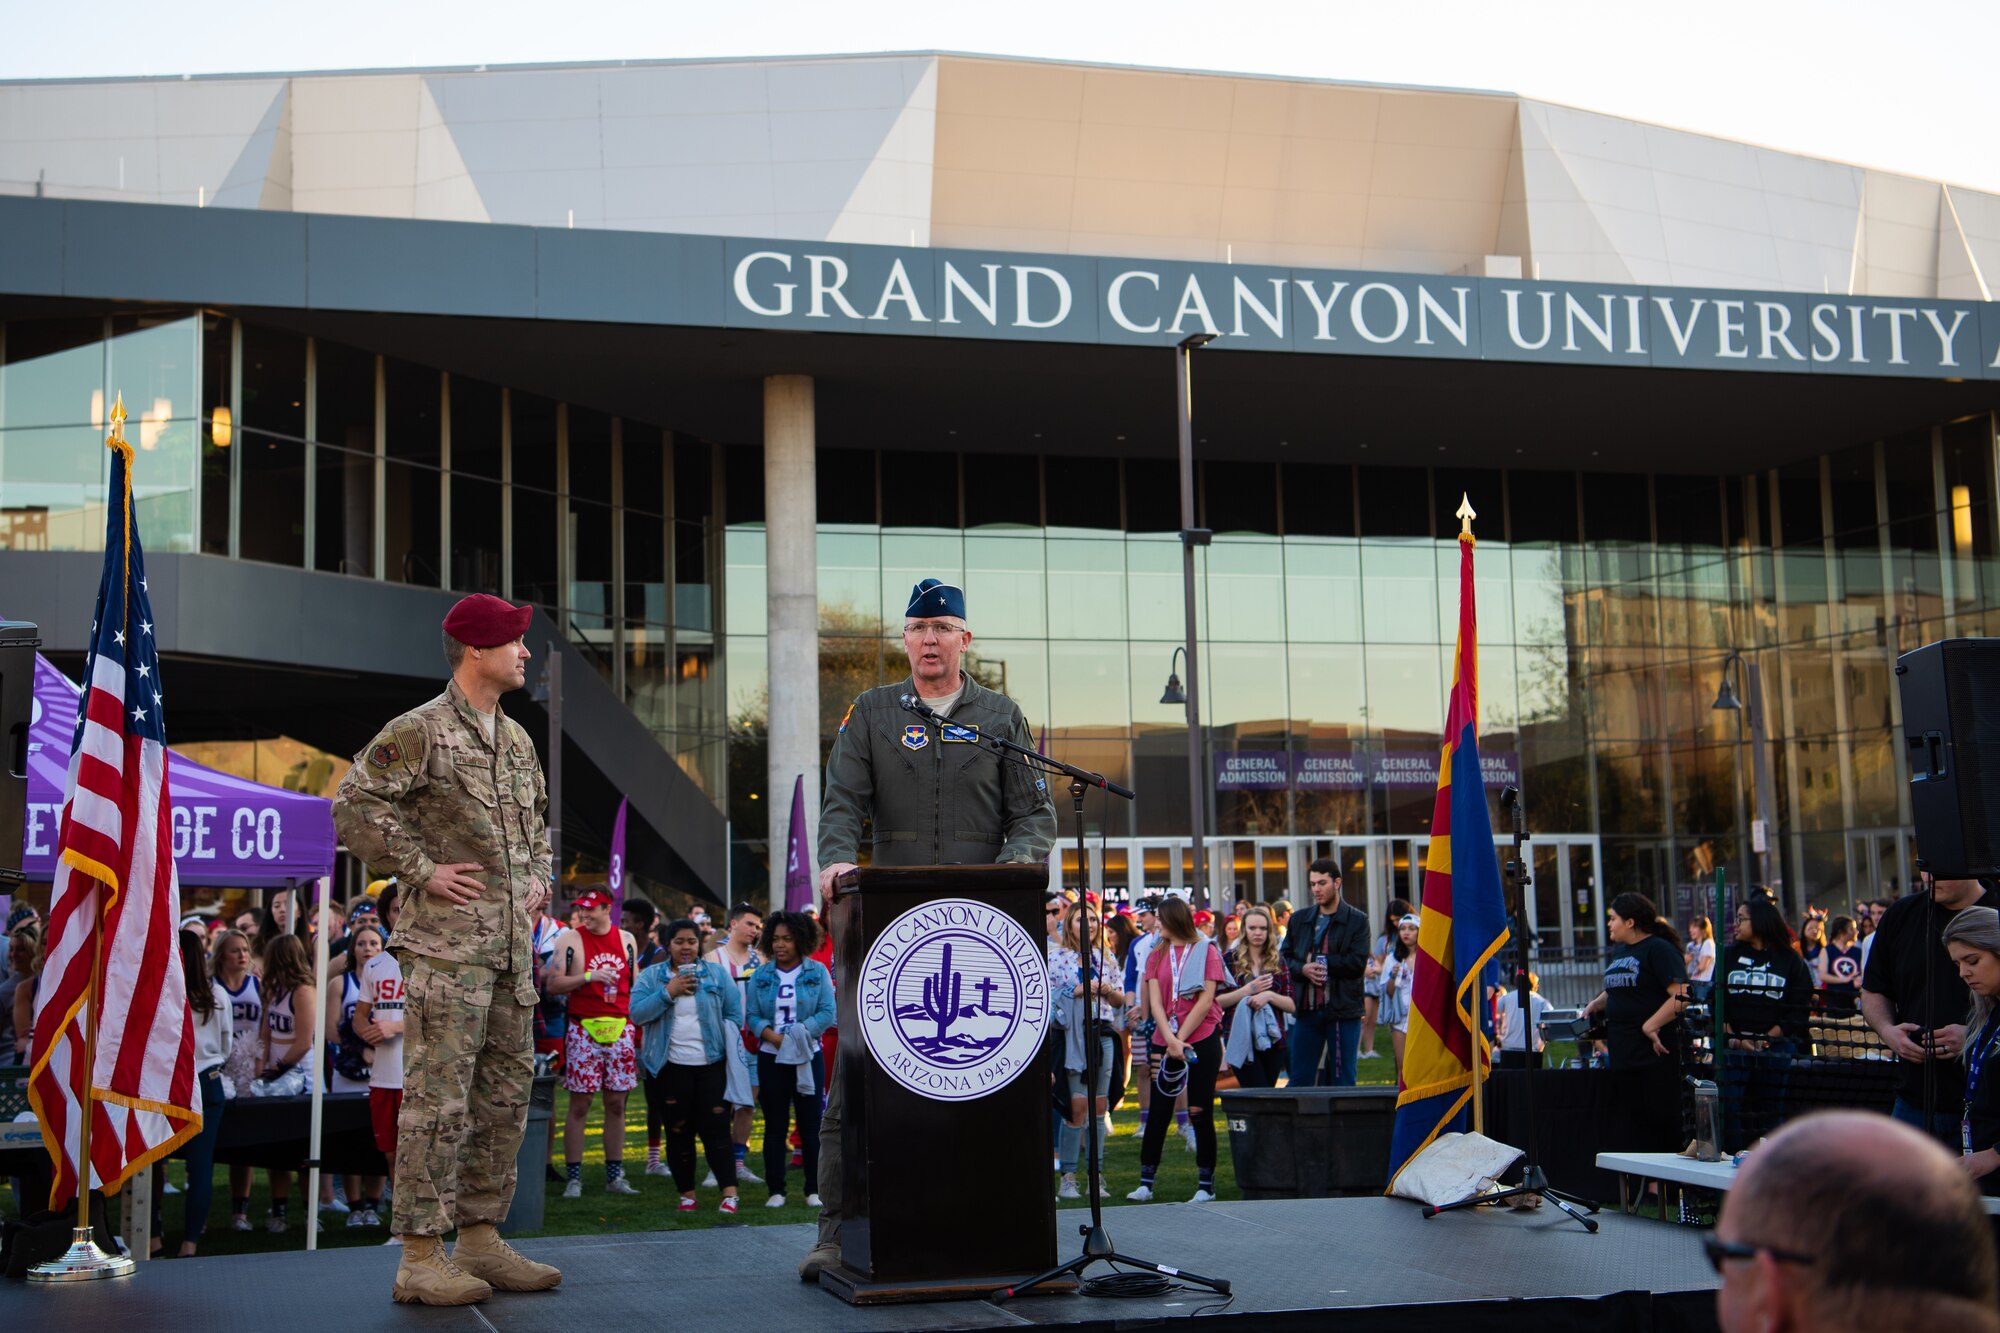 Brig. Gen. Todd Canterbury, 56th Fighter Wing commander and Chief Master Sgt. Ronald Thompson, 56th FW command chief, speak in front of Grand Canyon University students and alumni at a tailgate, Feb. 27, 2019 in Phoenix, Ariz.